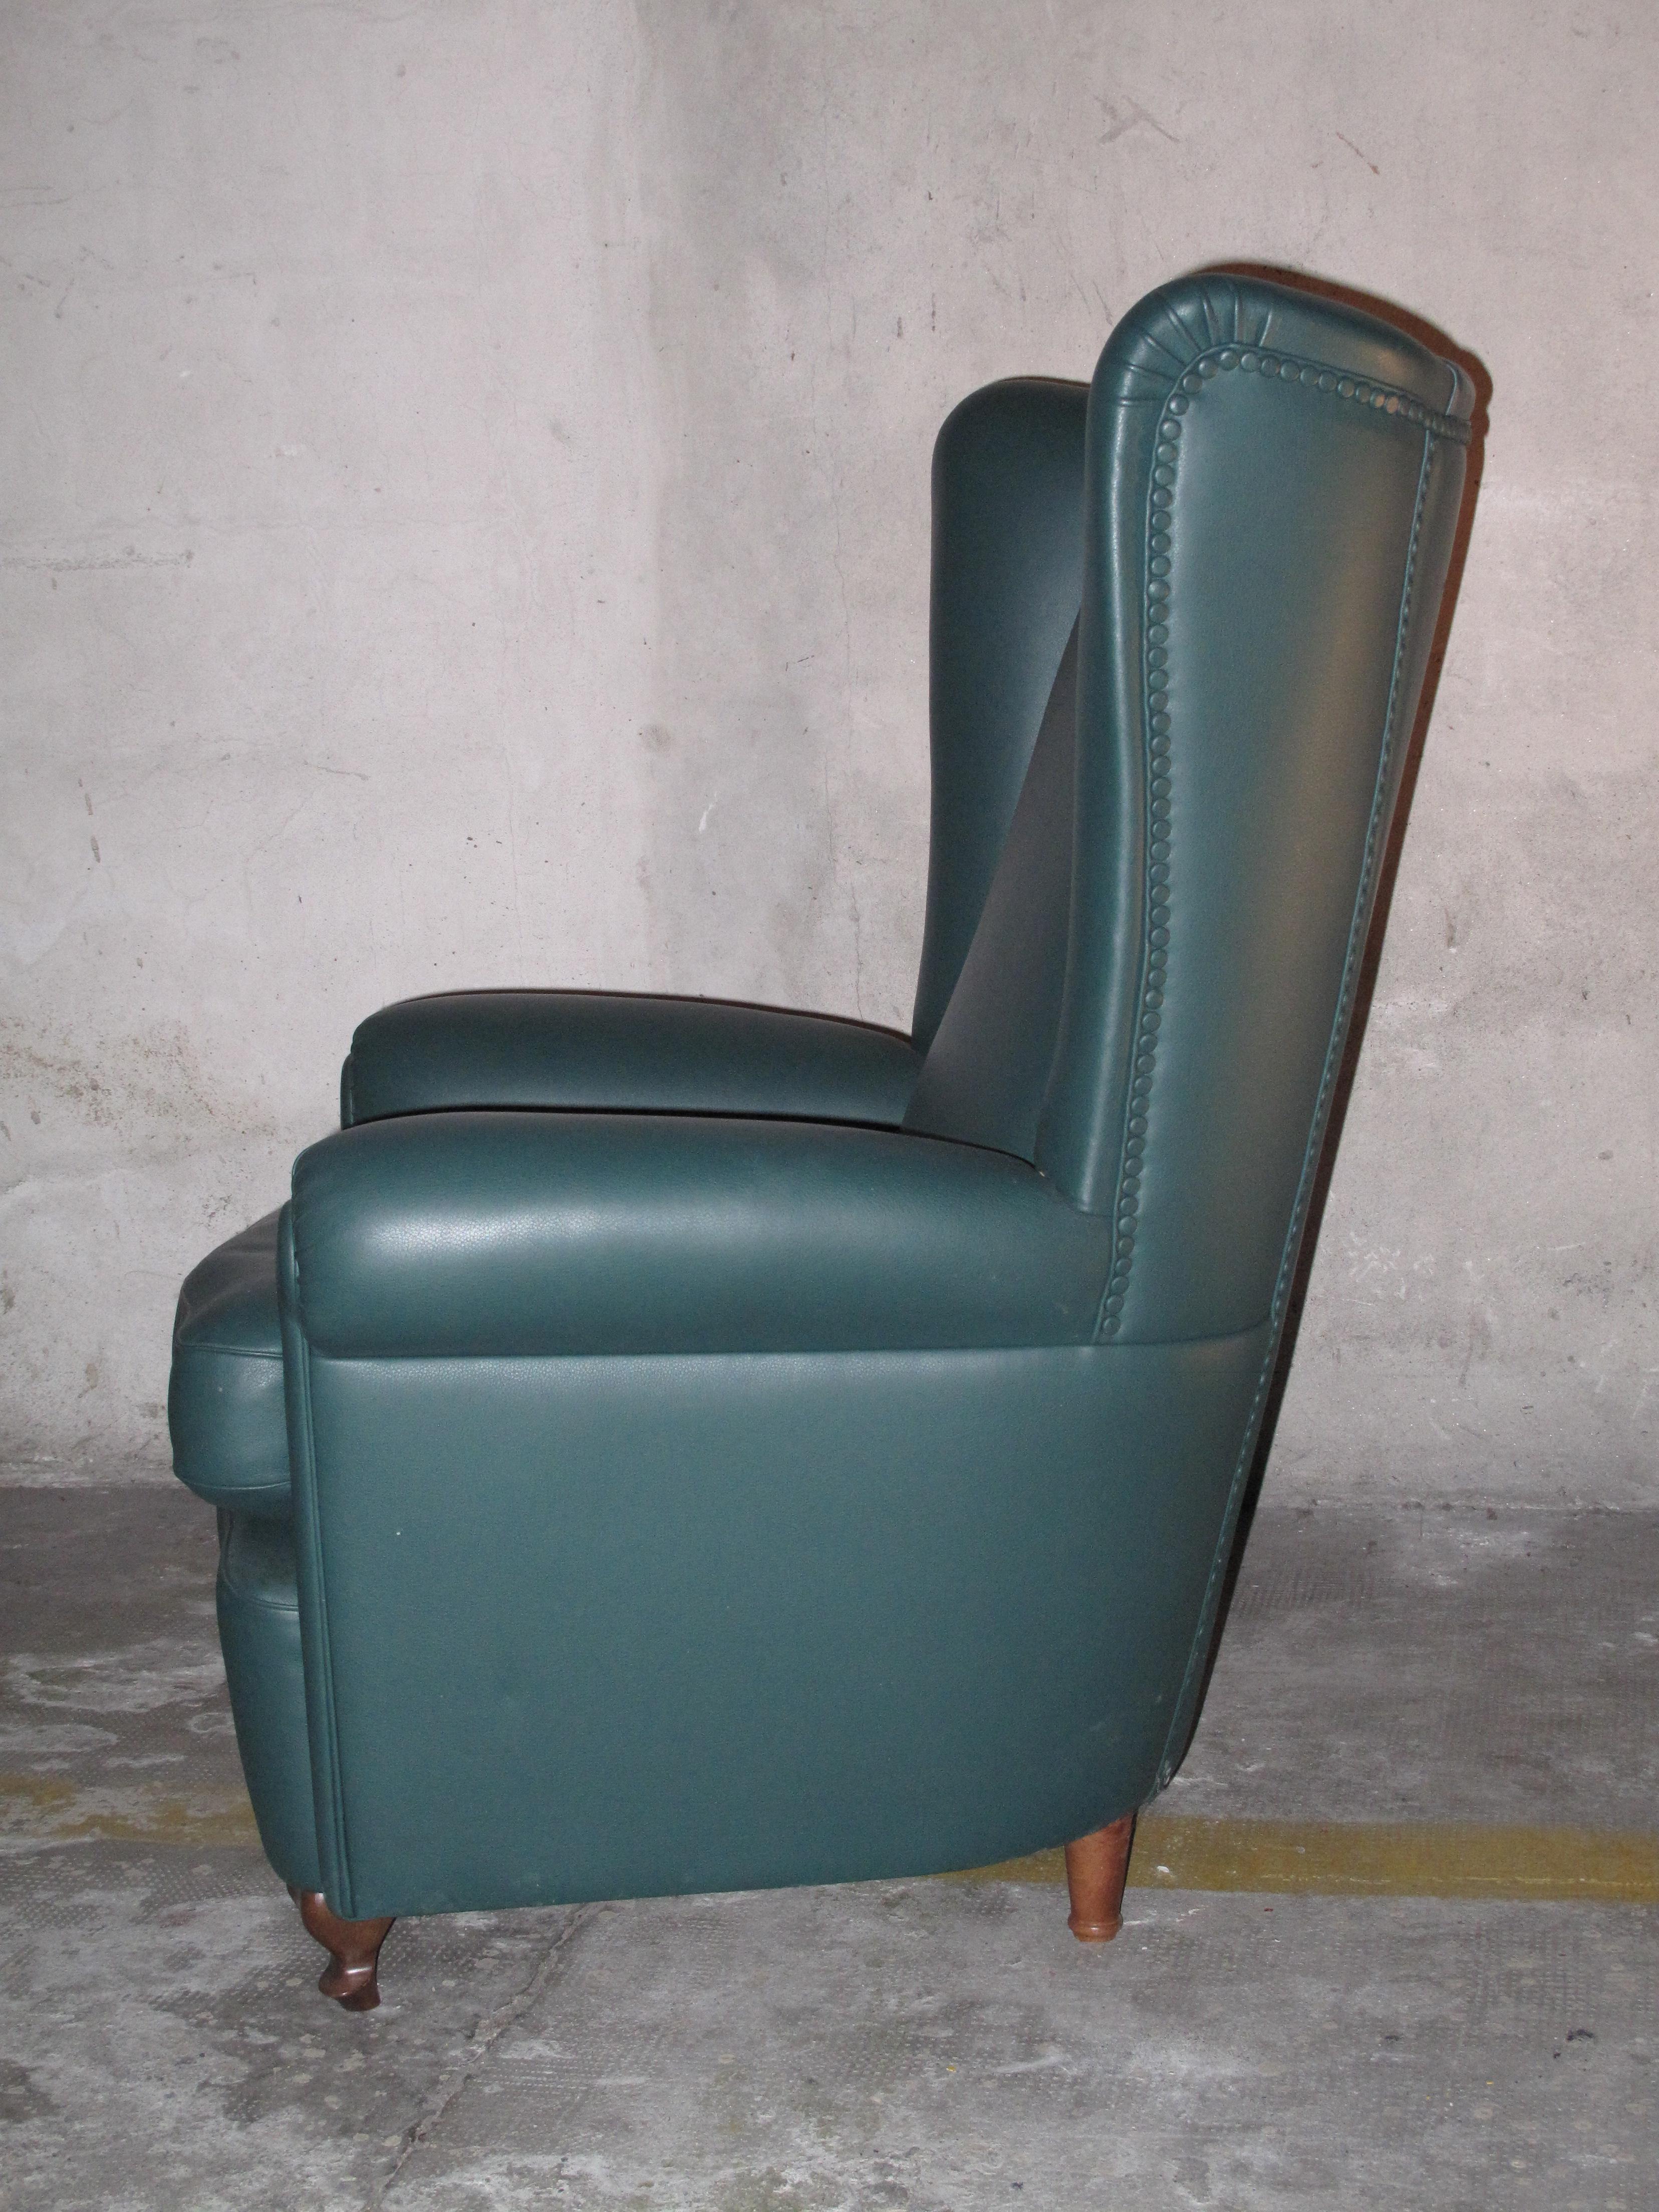 Striking high backed, leather armchair with rolled arms and slight wingtips at the top of the back. Leather wrapped tacks. Sculpted wood legs.